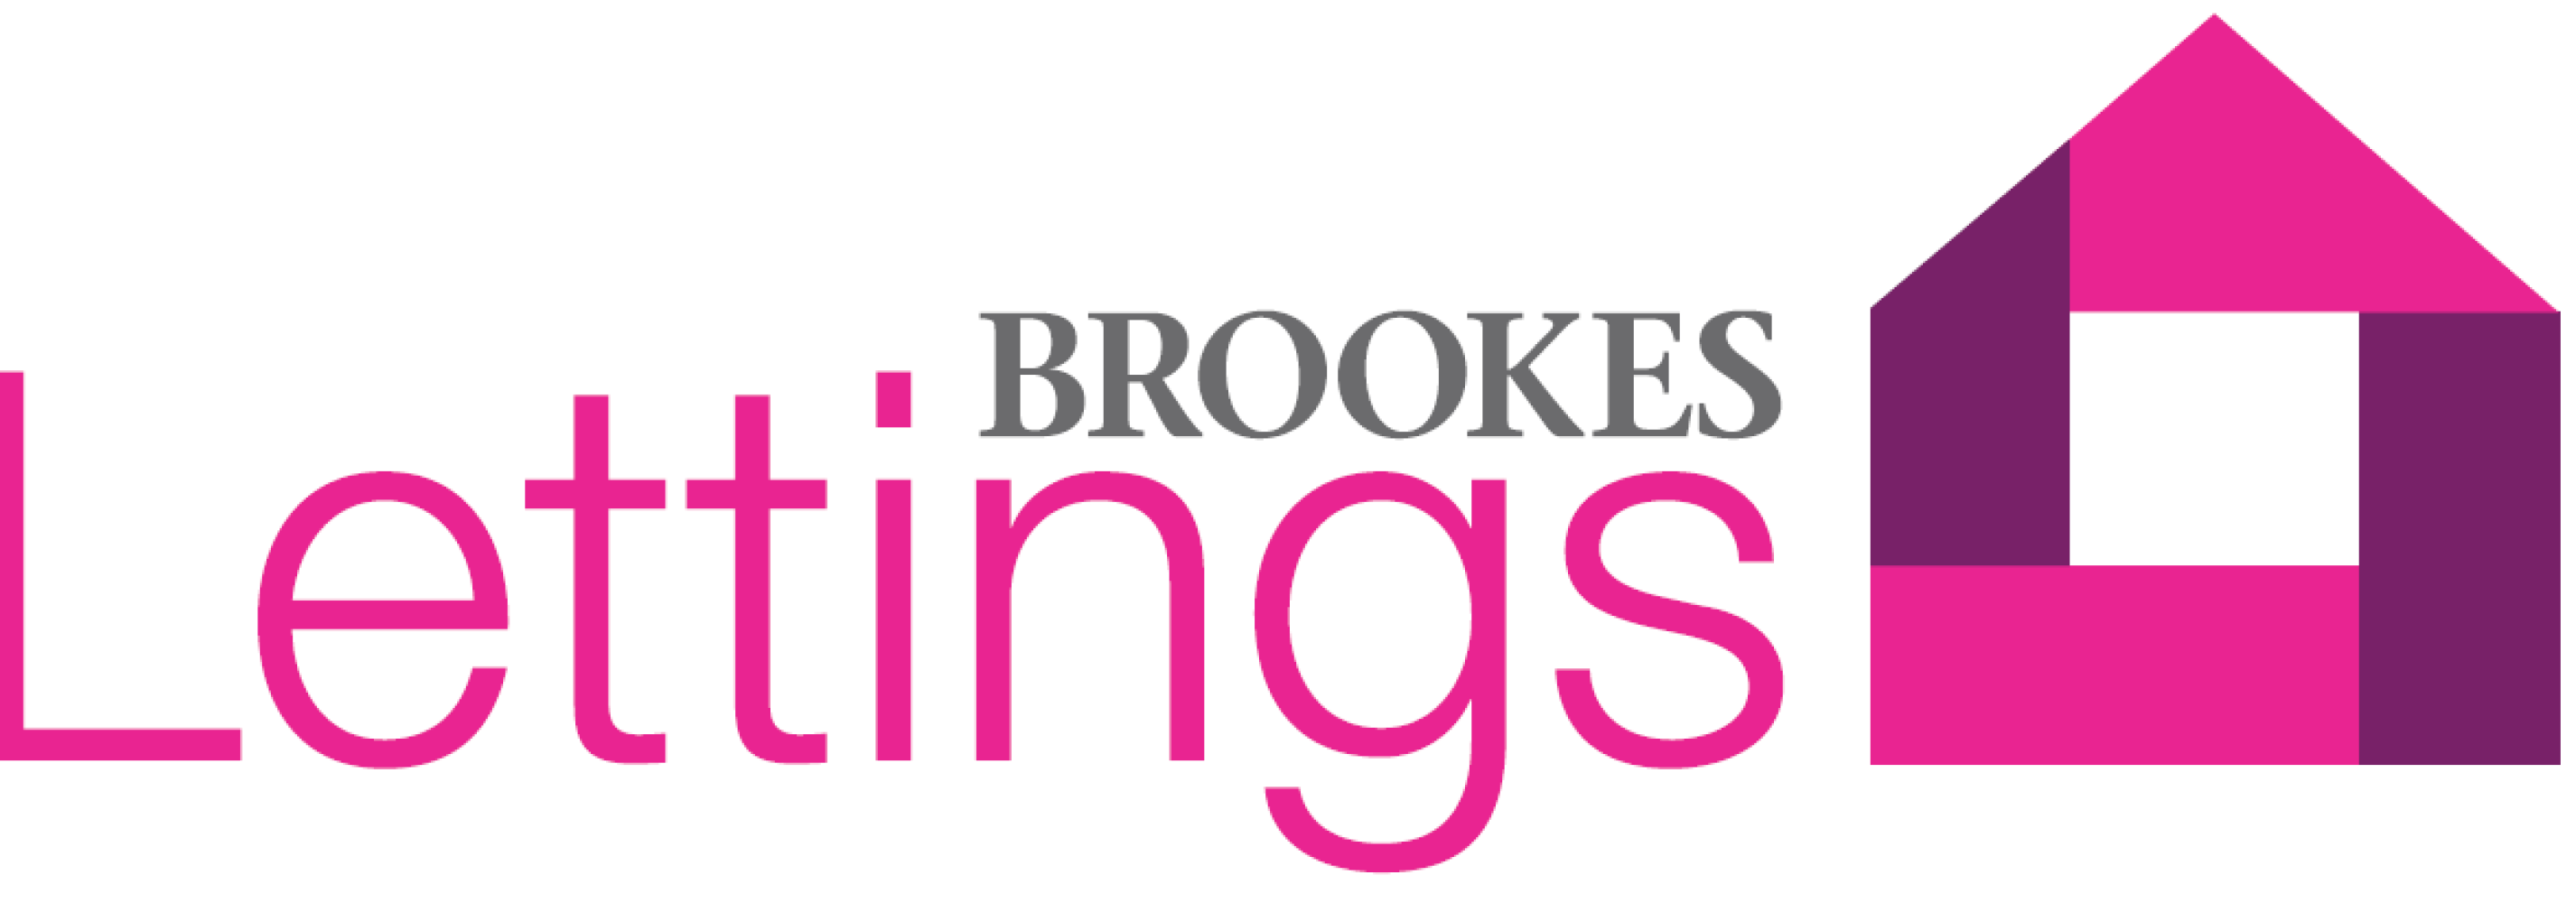 Brookes Lettings Logo (grey and pink text with a pink and purple abstract house)